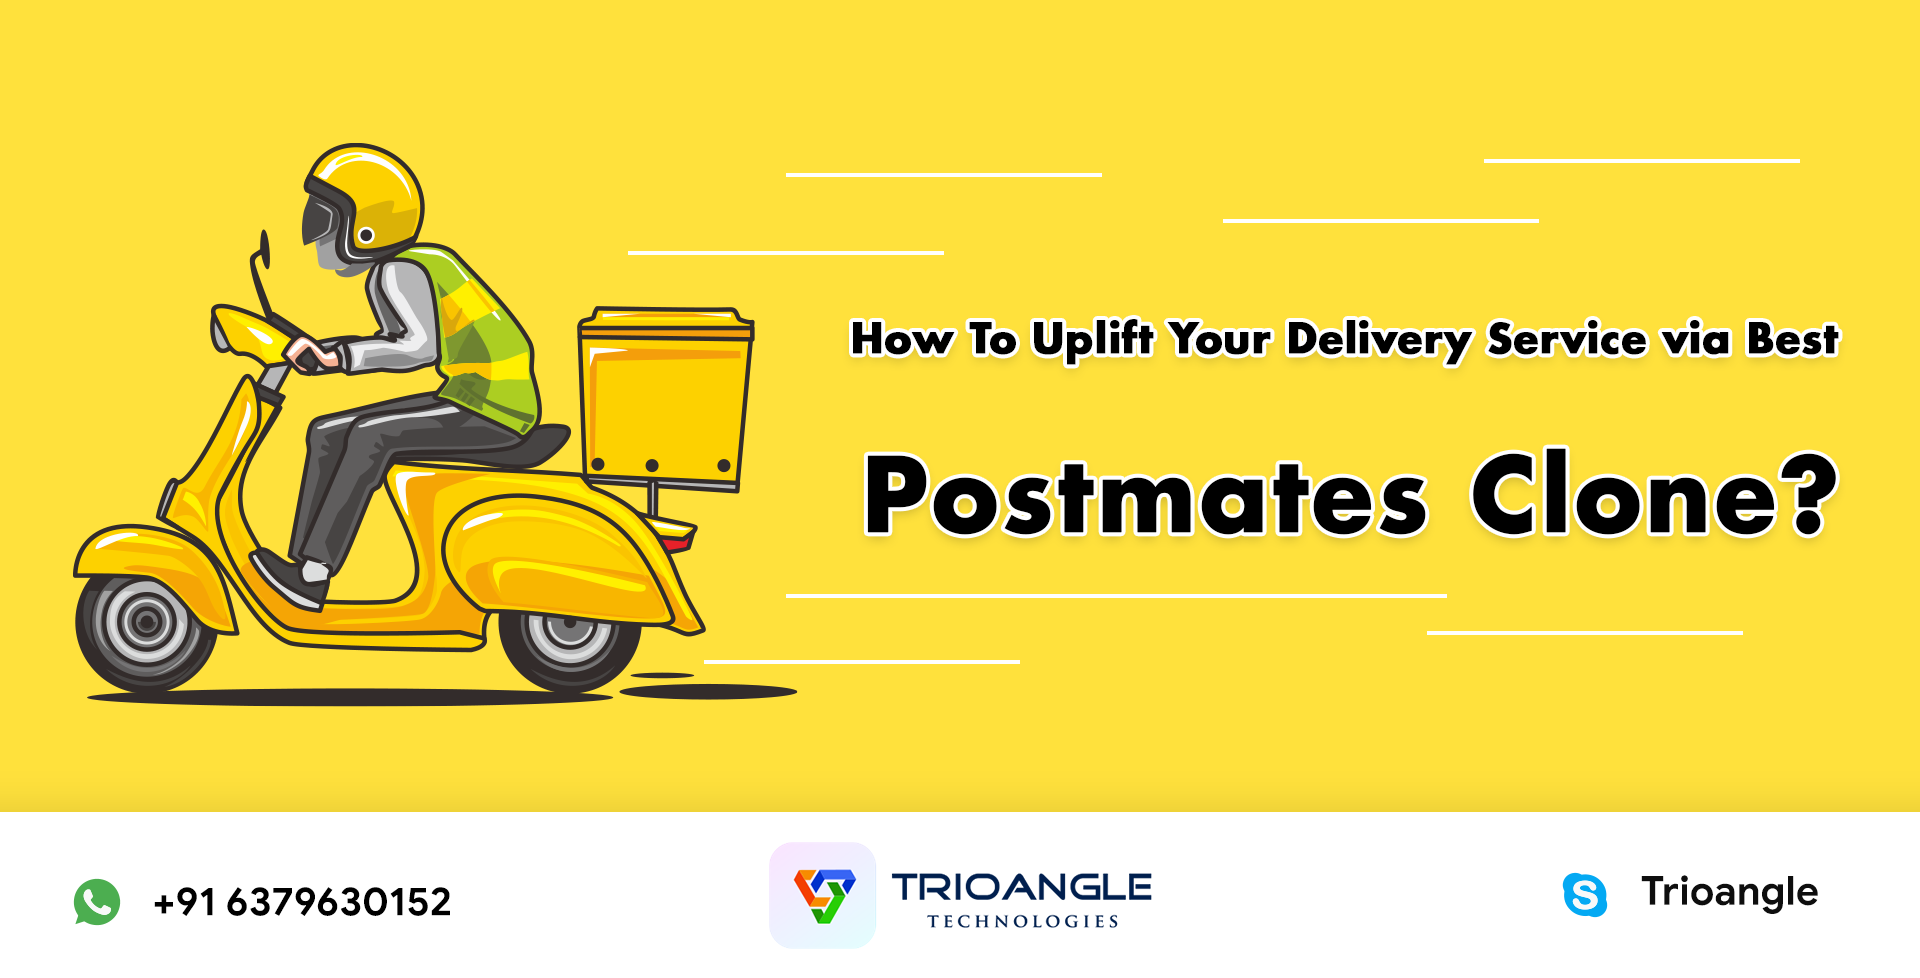 How To Uplift Your Delivery Service via Best Postmates Clone?